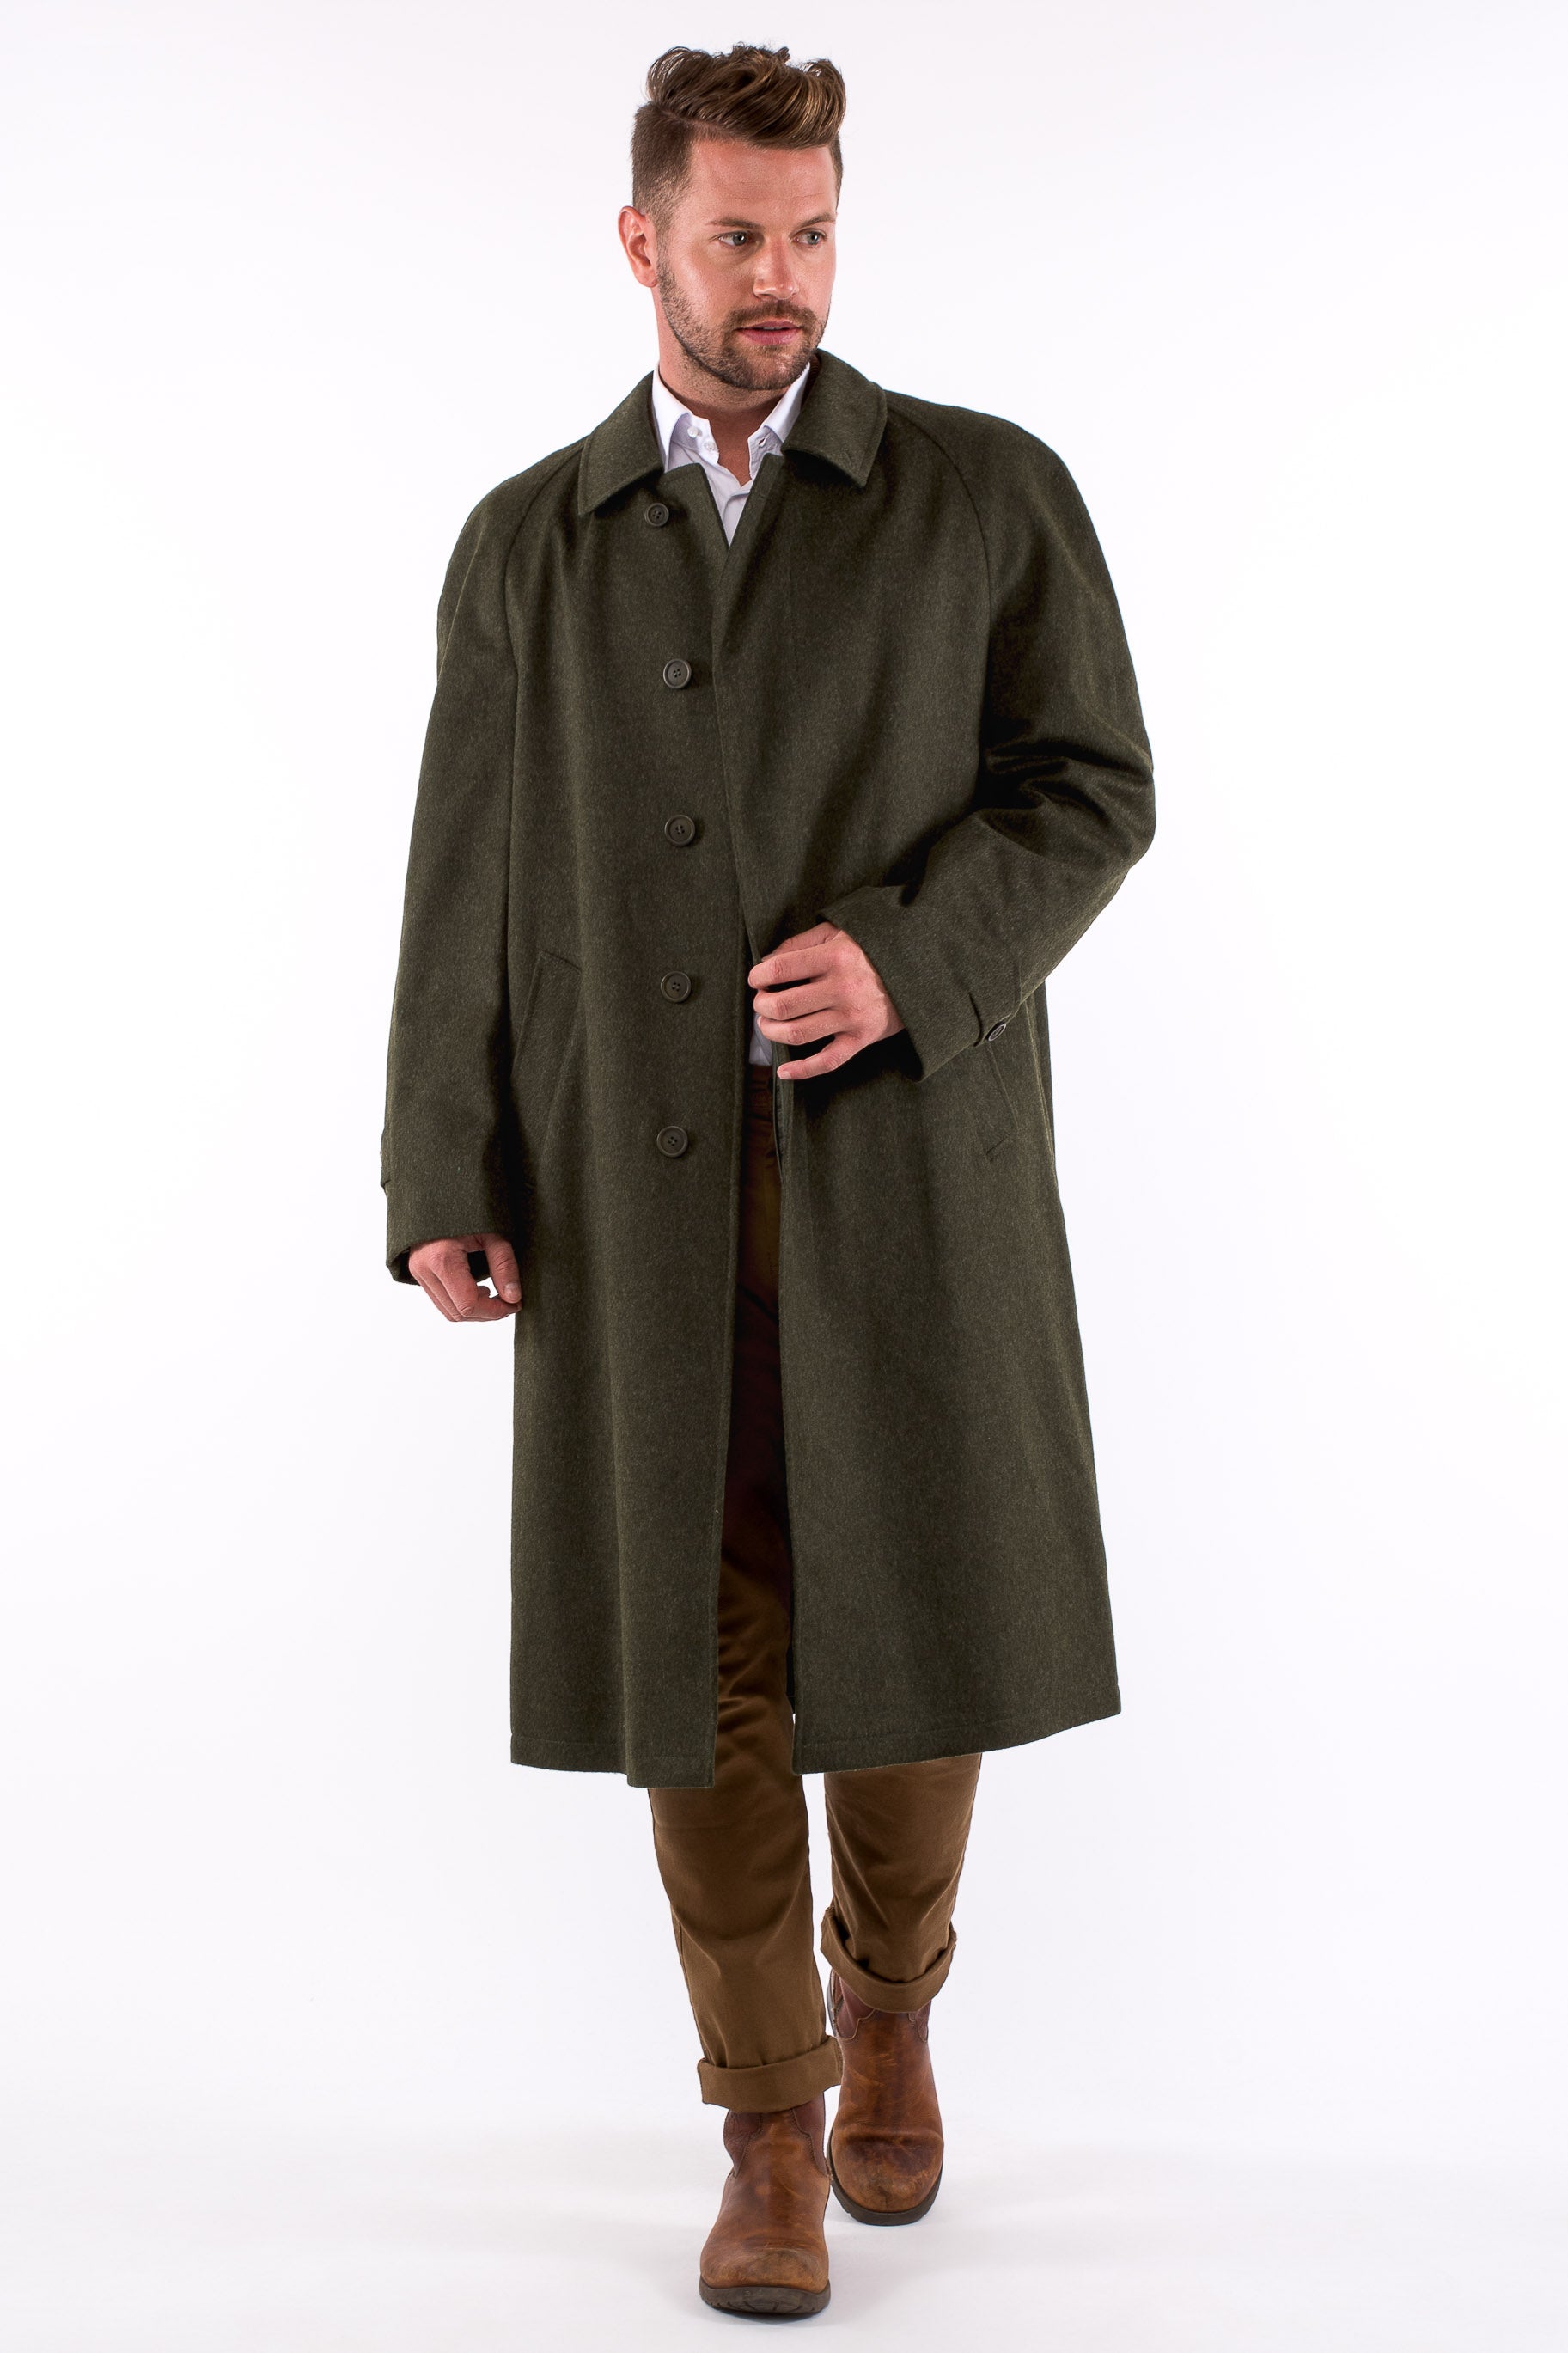 Rory - Men's Travel Weight Classic Loden Wool Overcoat with Raglan Sleeves